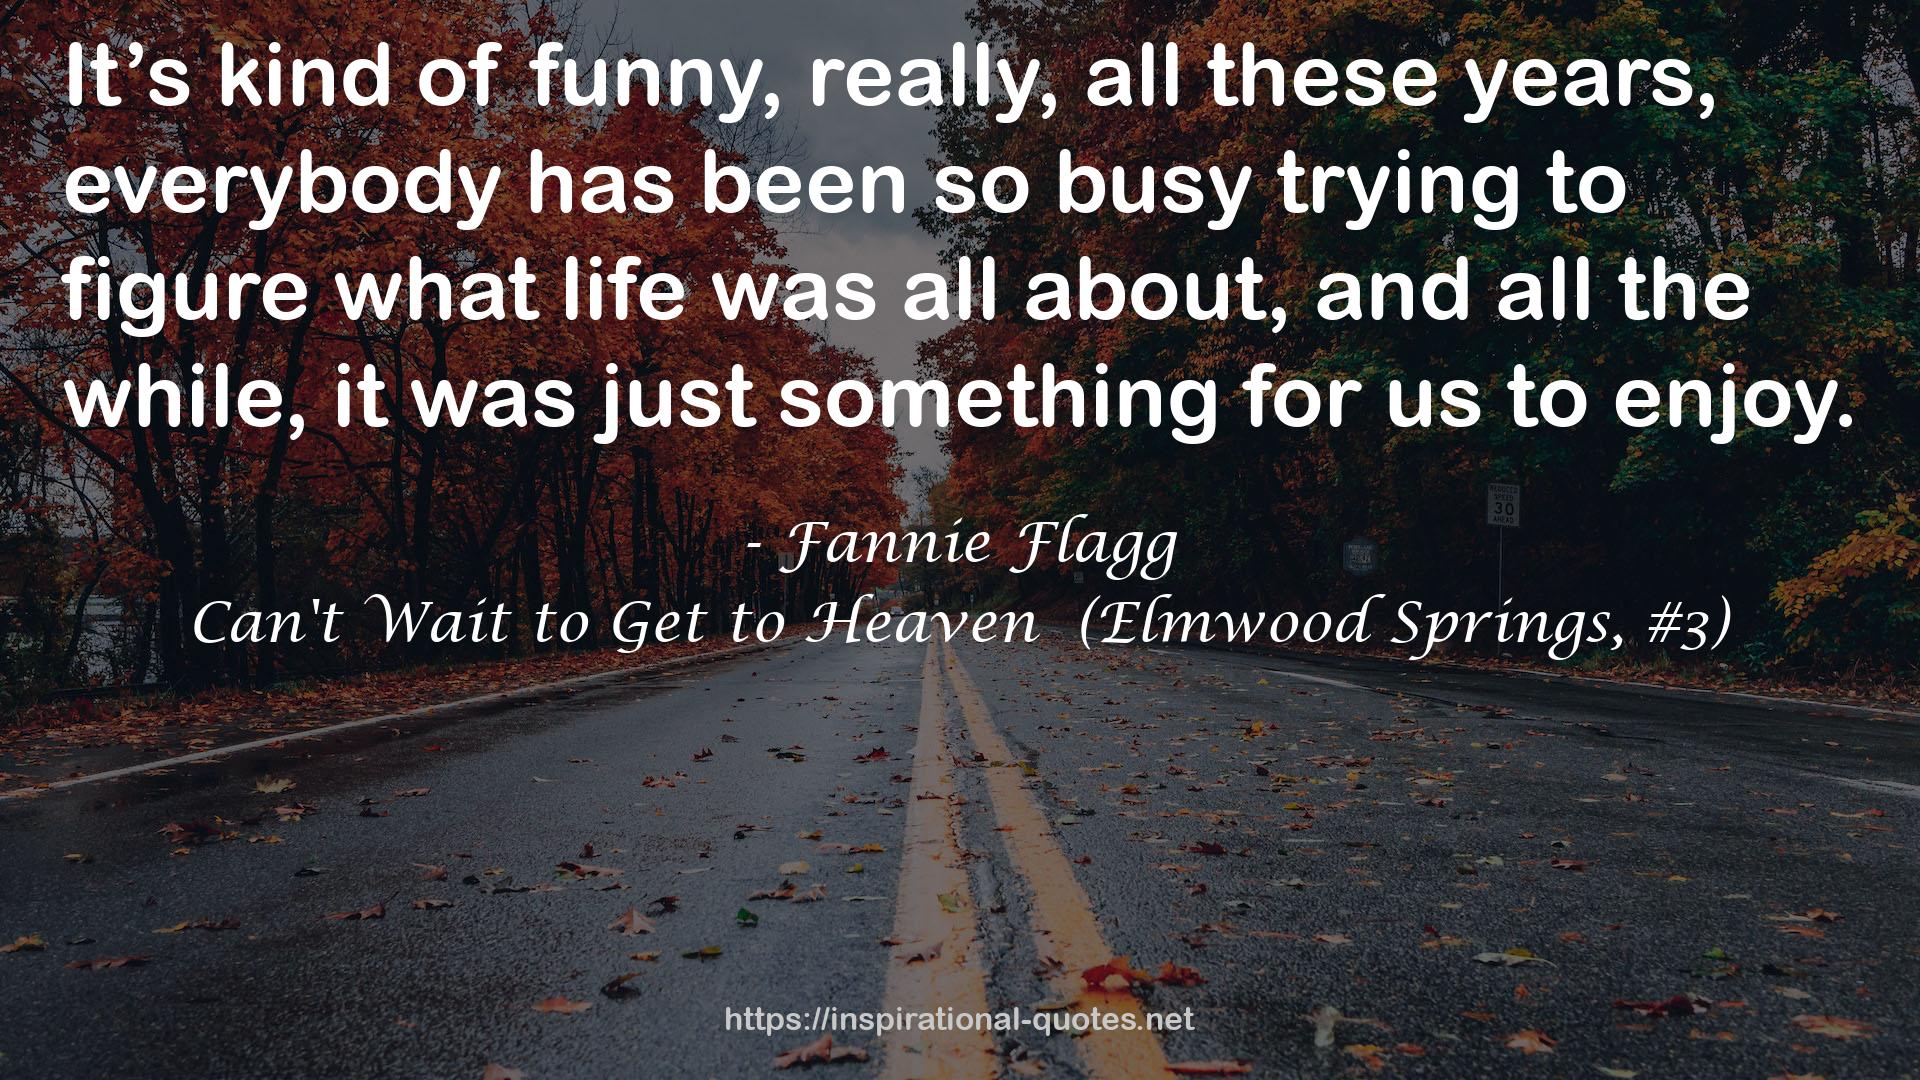 Can't Wait to Get to Heaven  (Elmwood Springs, #3) QUOTES